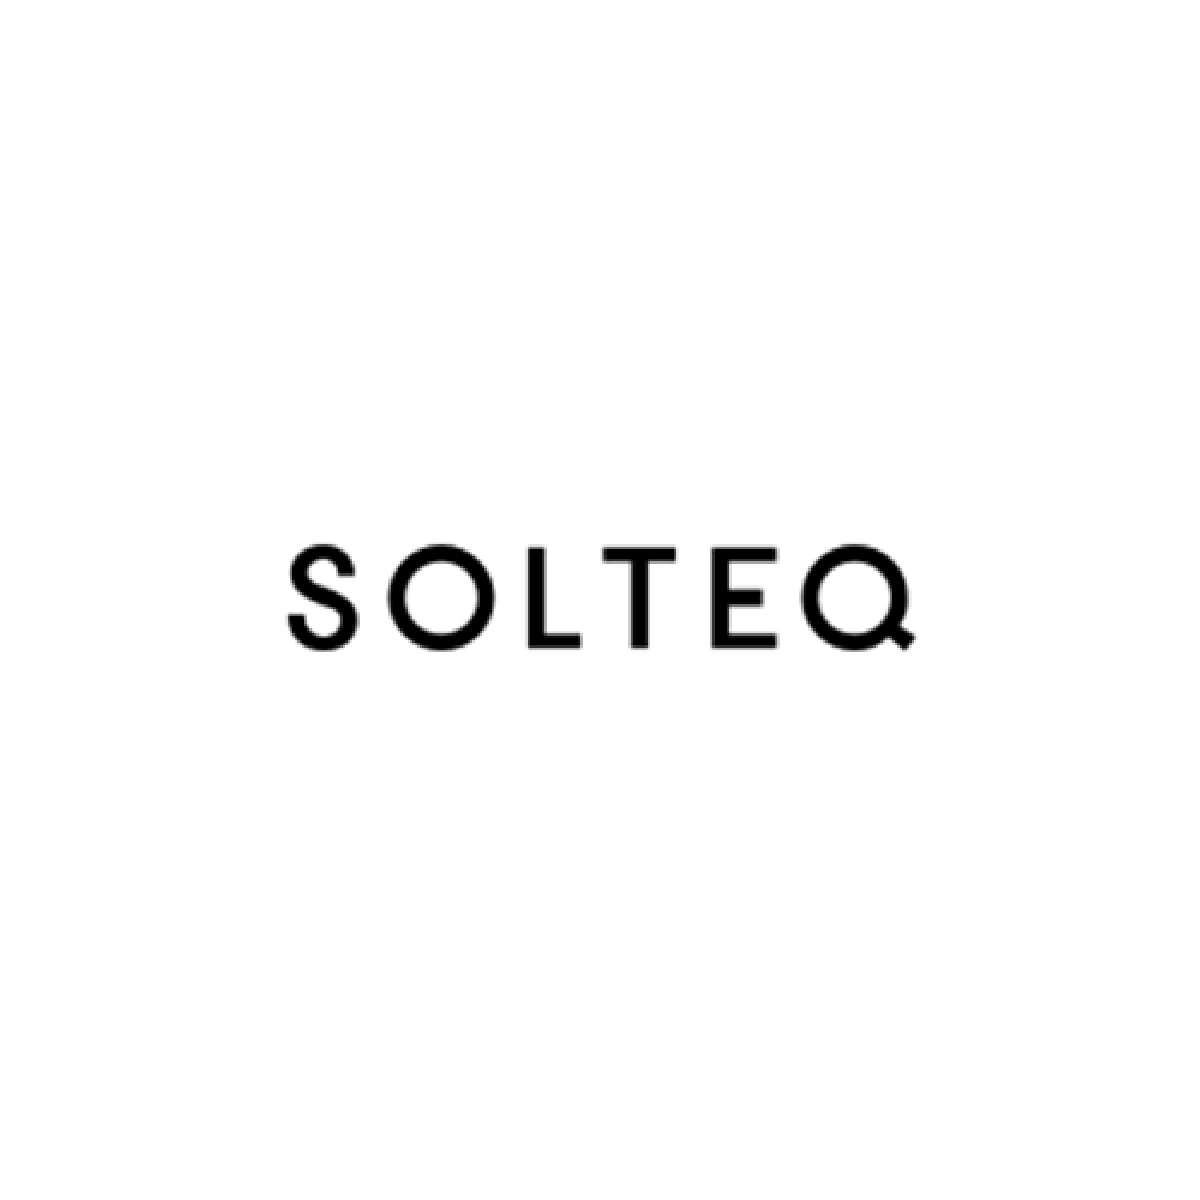 Article Image - Solteq Acquires inPulse Works Oy